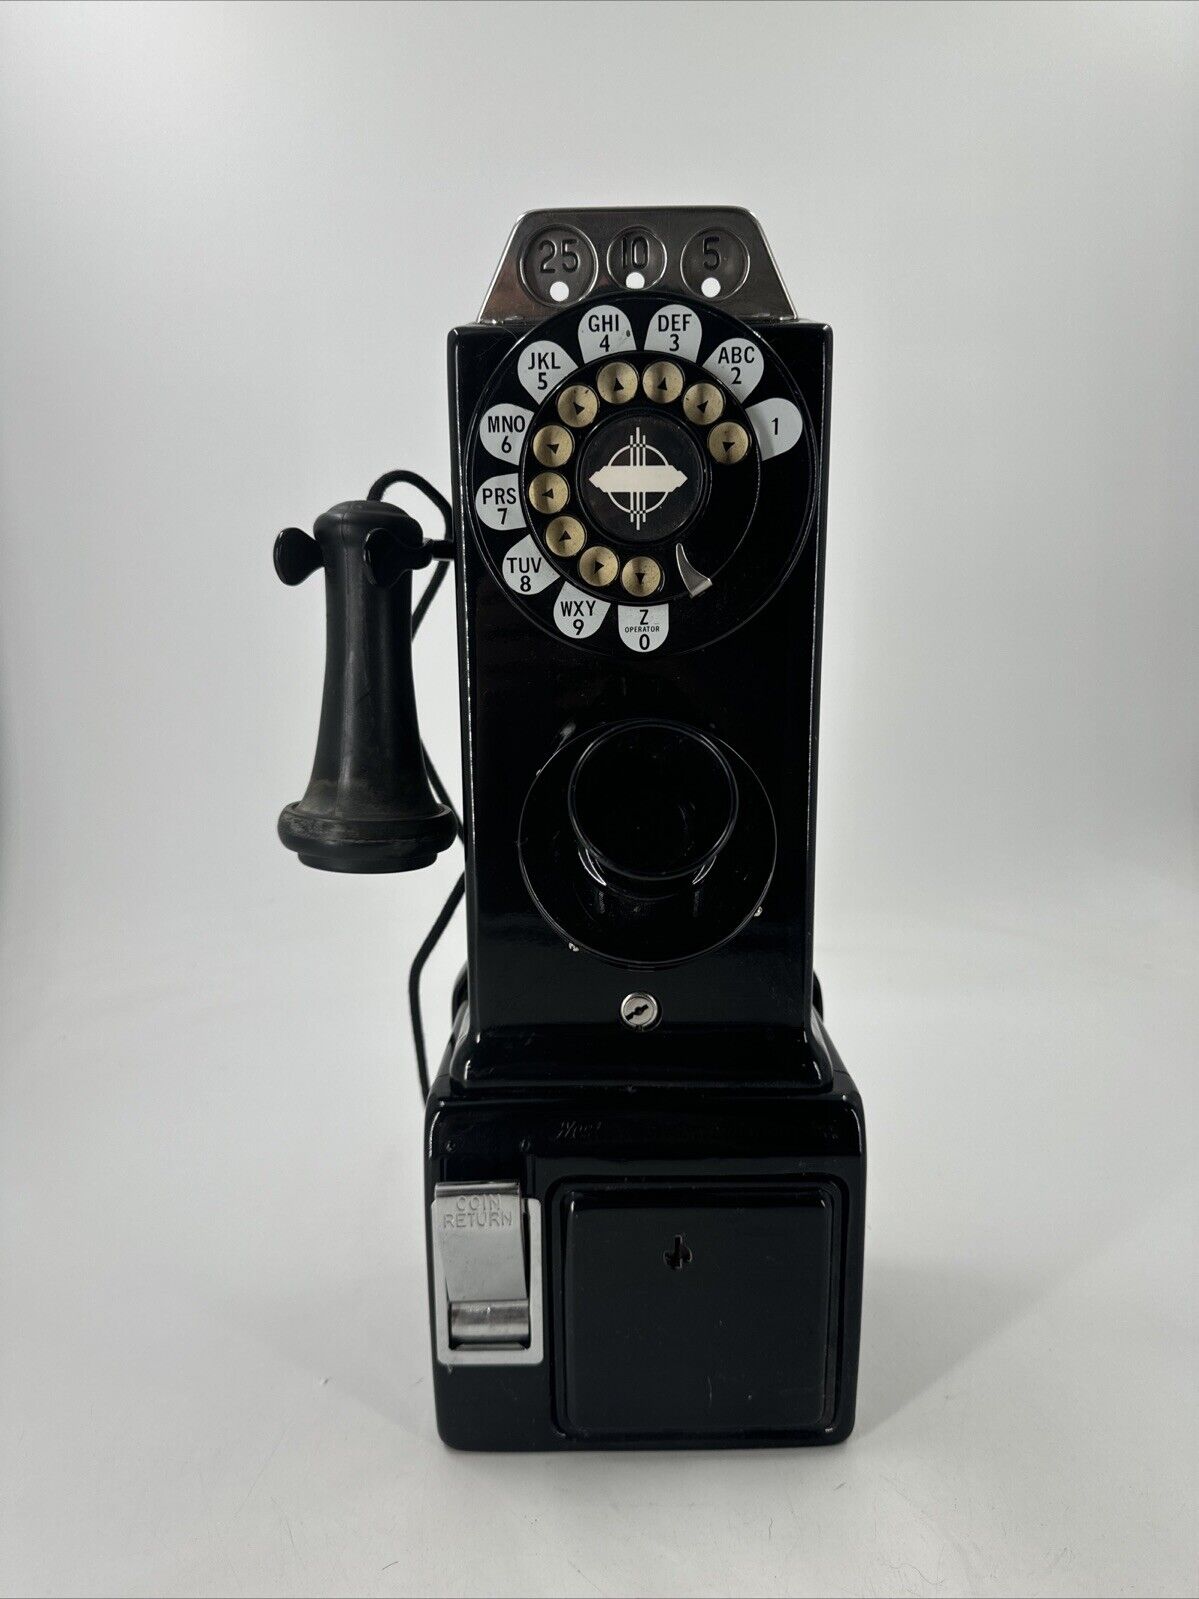 Western Electric Pay Telephone 3 Coin Slot Black Restrored Works No Keys